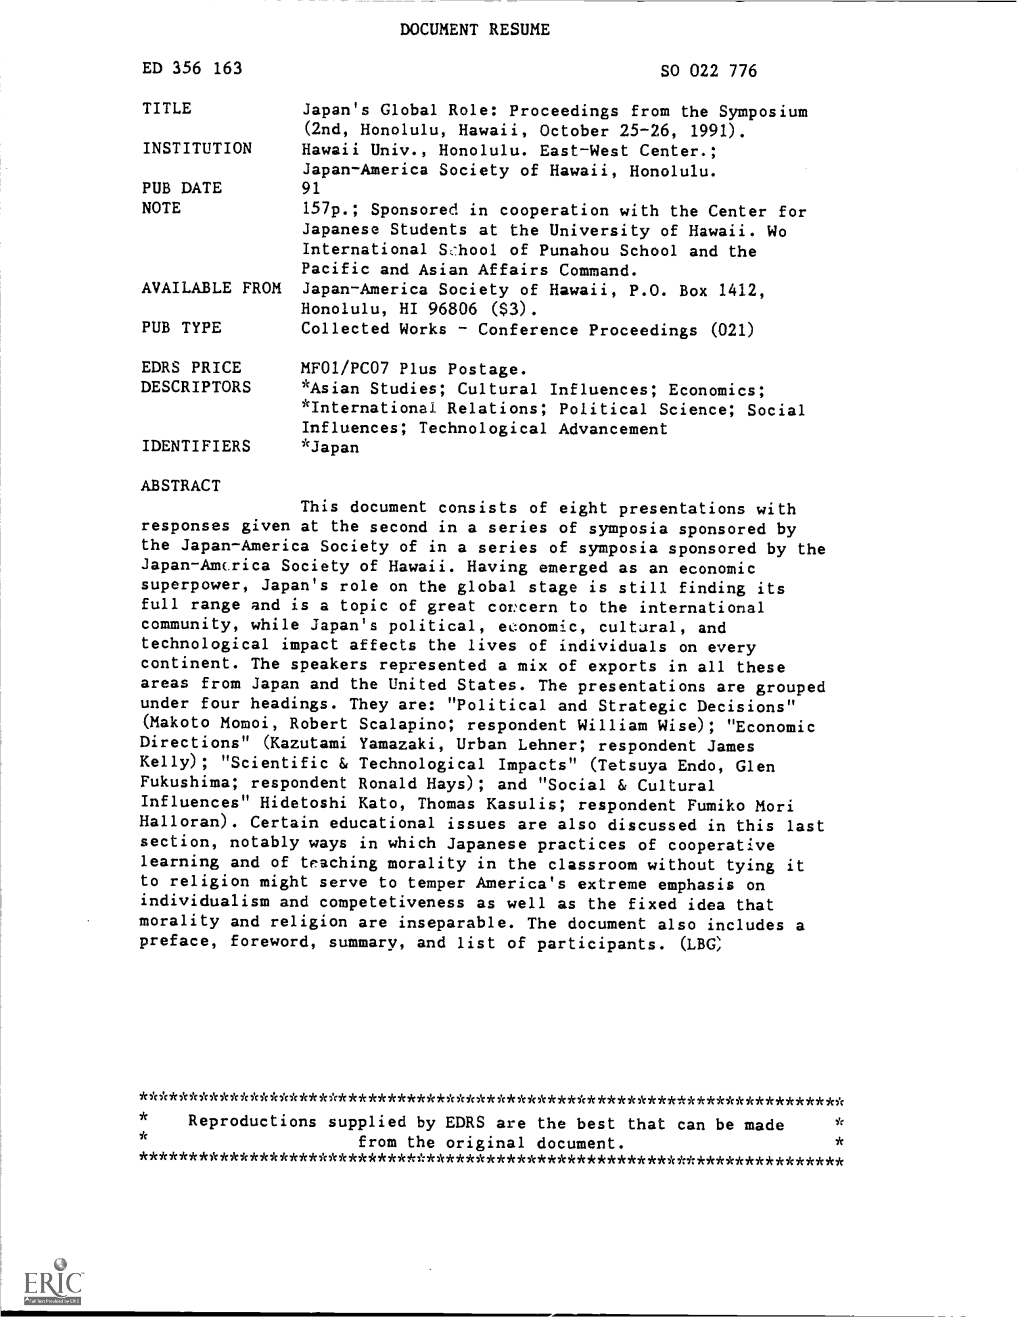 Japan's Global Role: Proceedings from the Symposium (2Nd, Honolulu, Hawaii, October 25-26, 1991)